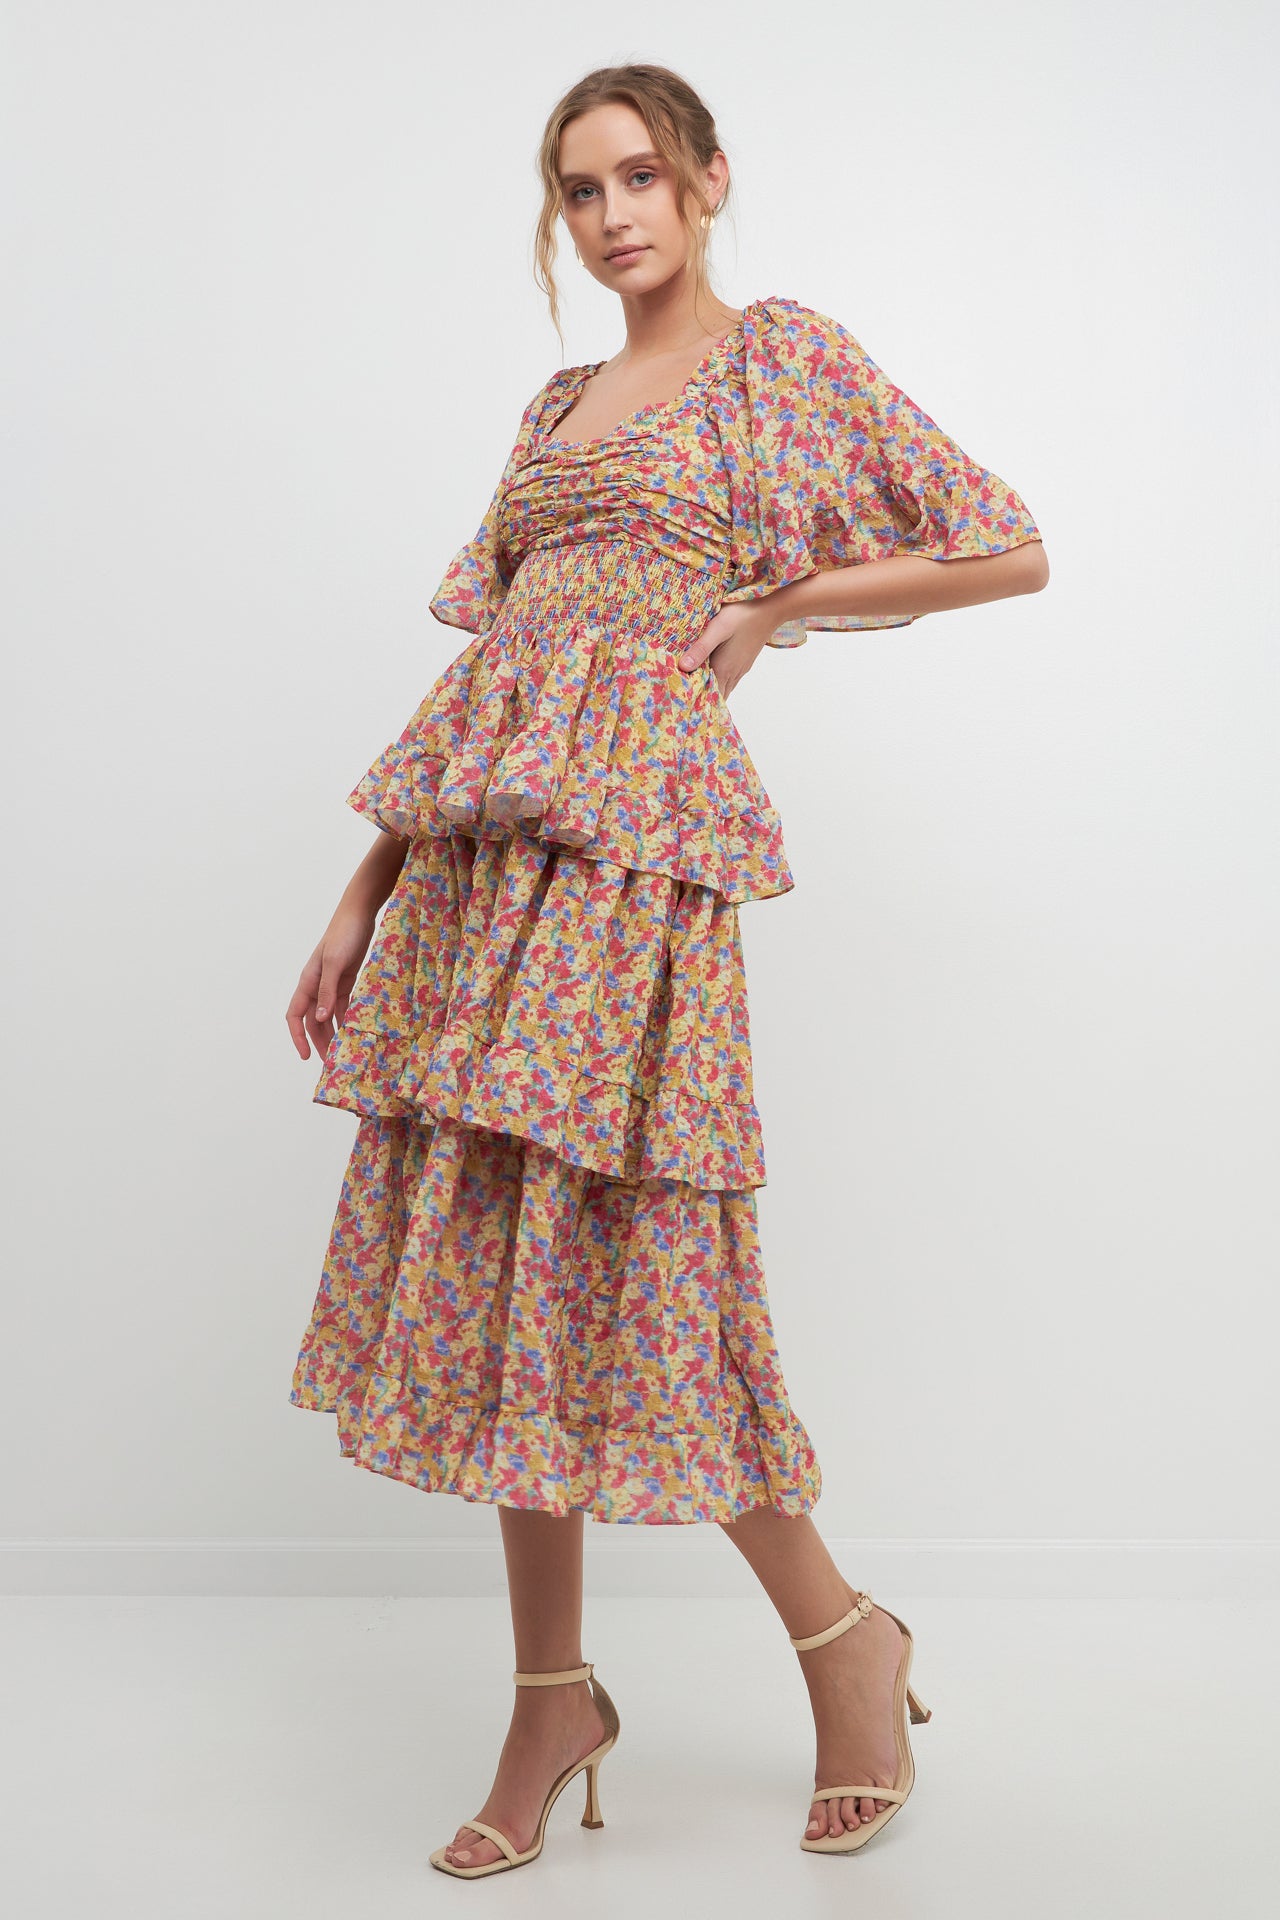 FREE THE ROSES - Floral Smocked Ruffle Tiered Maxi Dress - DRESSES available at Objectrare